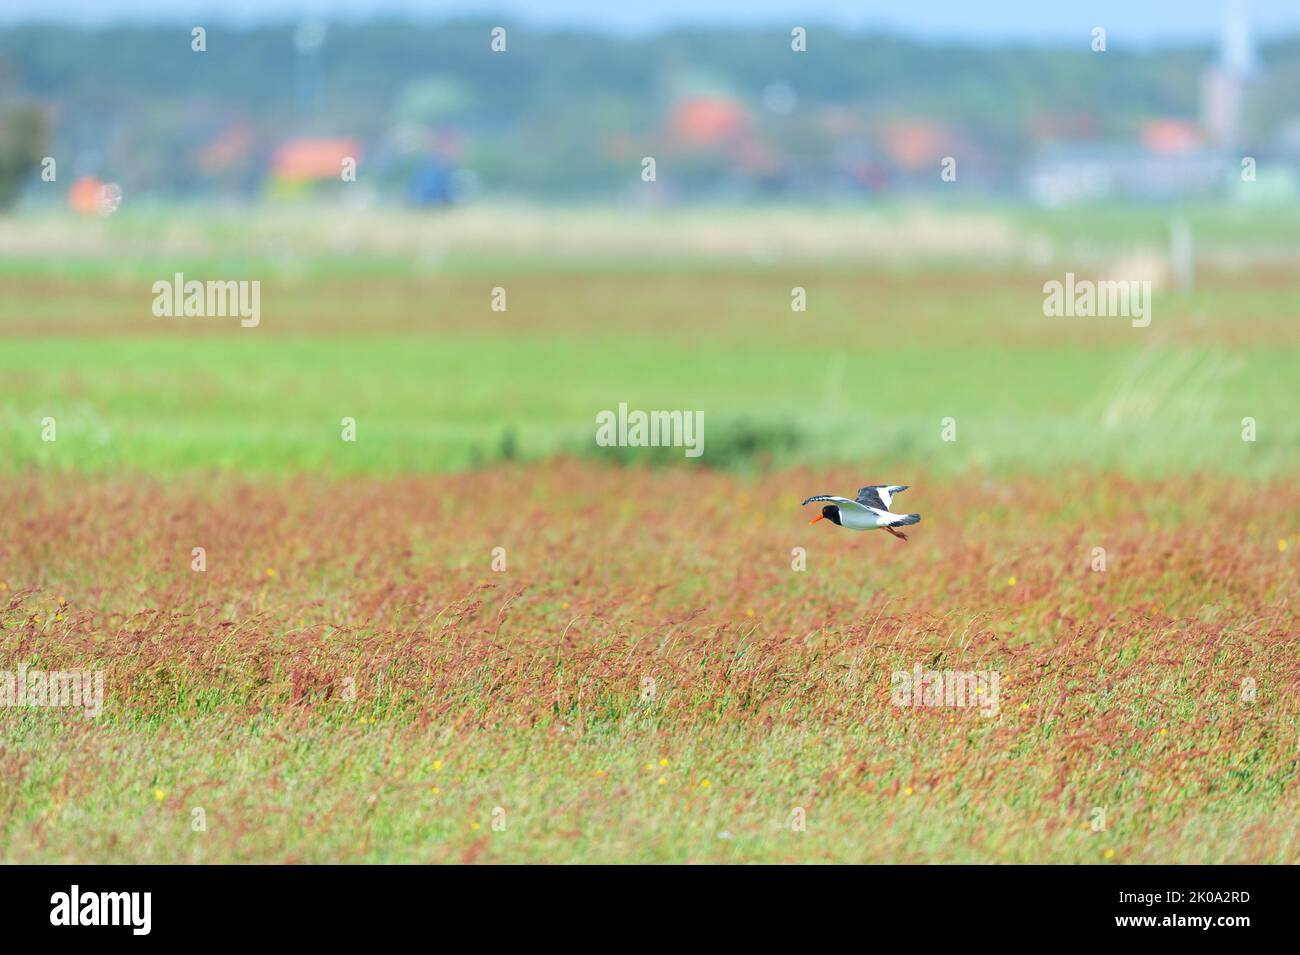 Flying oyster catcher in nature landscape Stock Photo